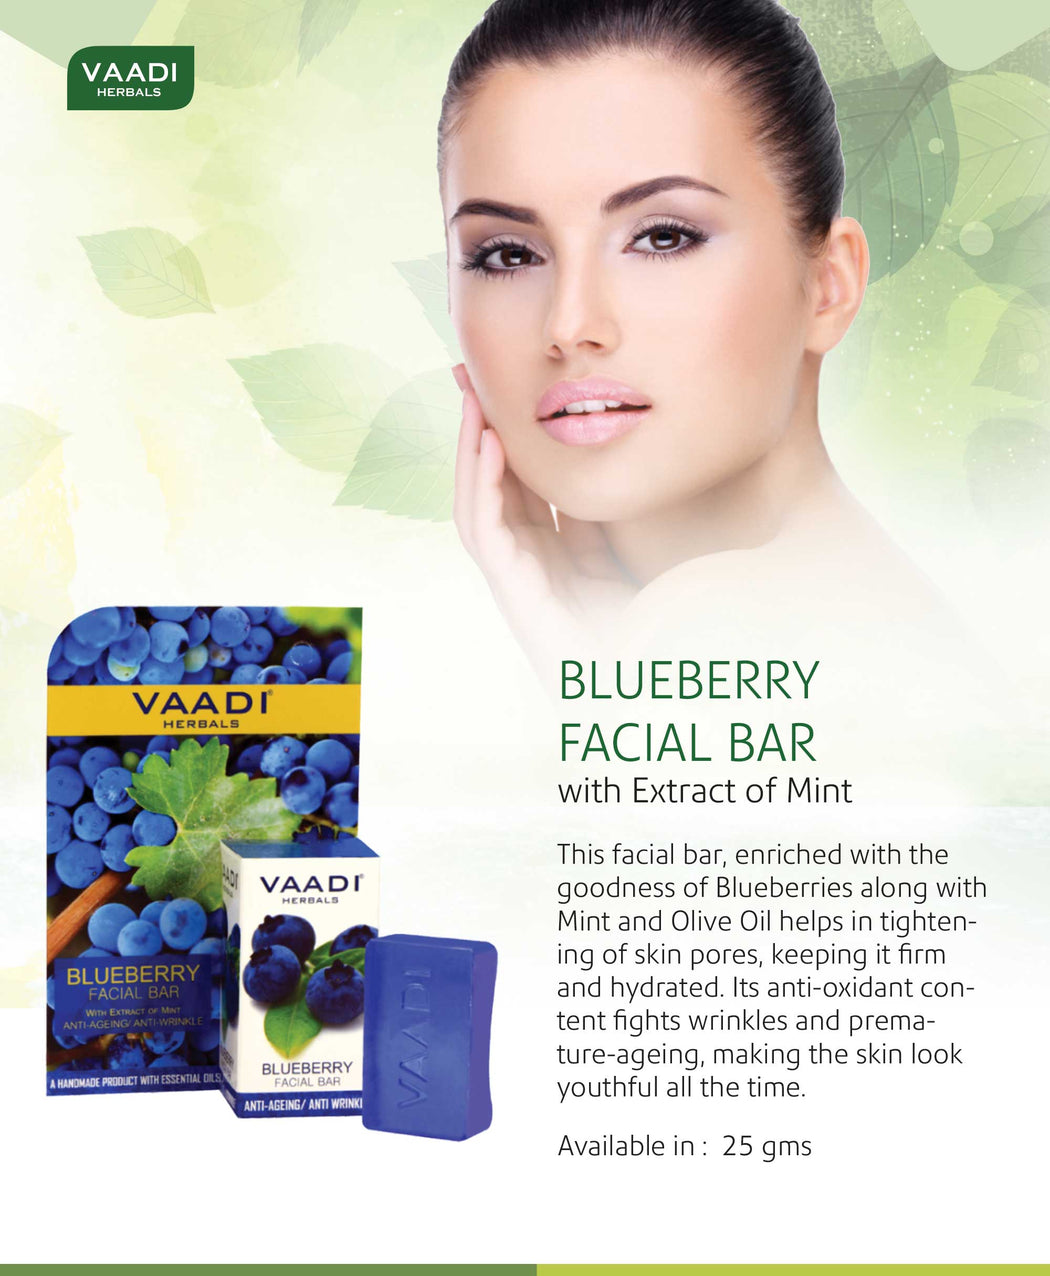 Pack of 6 Blueberry Facial Bars with Extract of Mint (25 gms x 6)